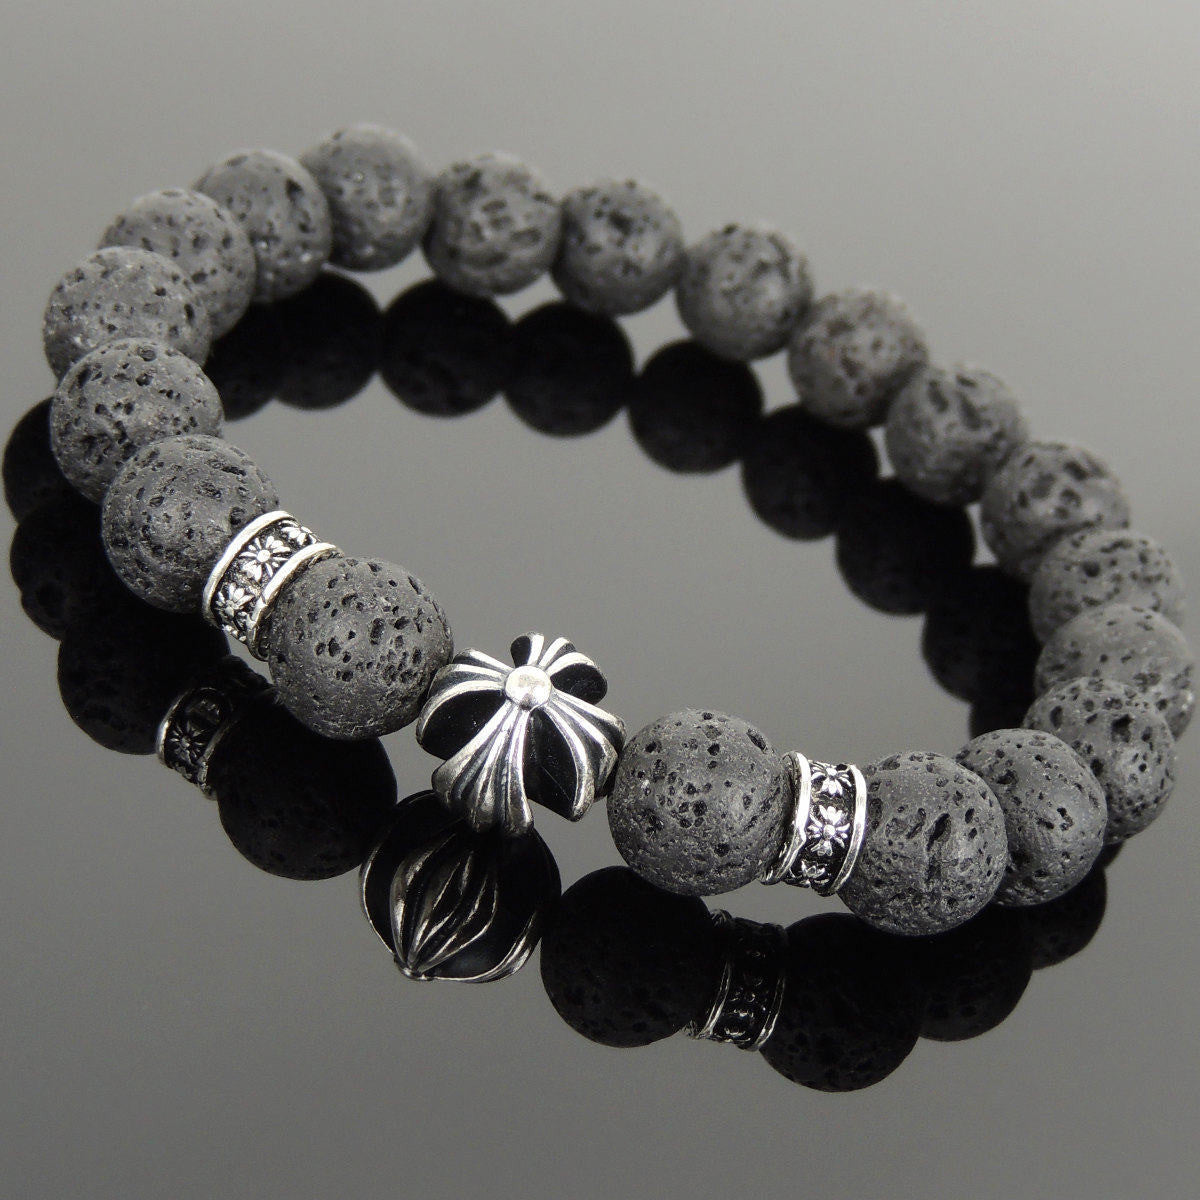 10mm Lava Rock Healing Stone Bracelet with S925 Sterling Silver Cross & Spacer Beads - Handmade by Gem & Silver BR1093